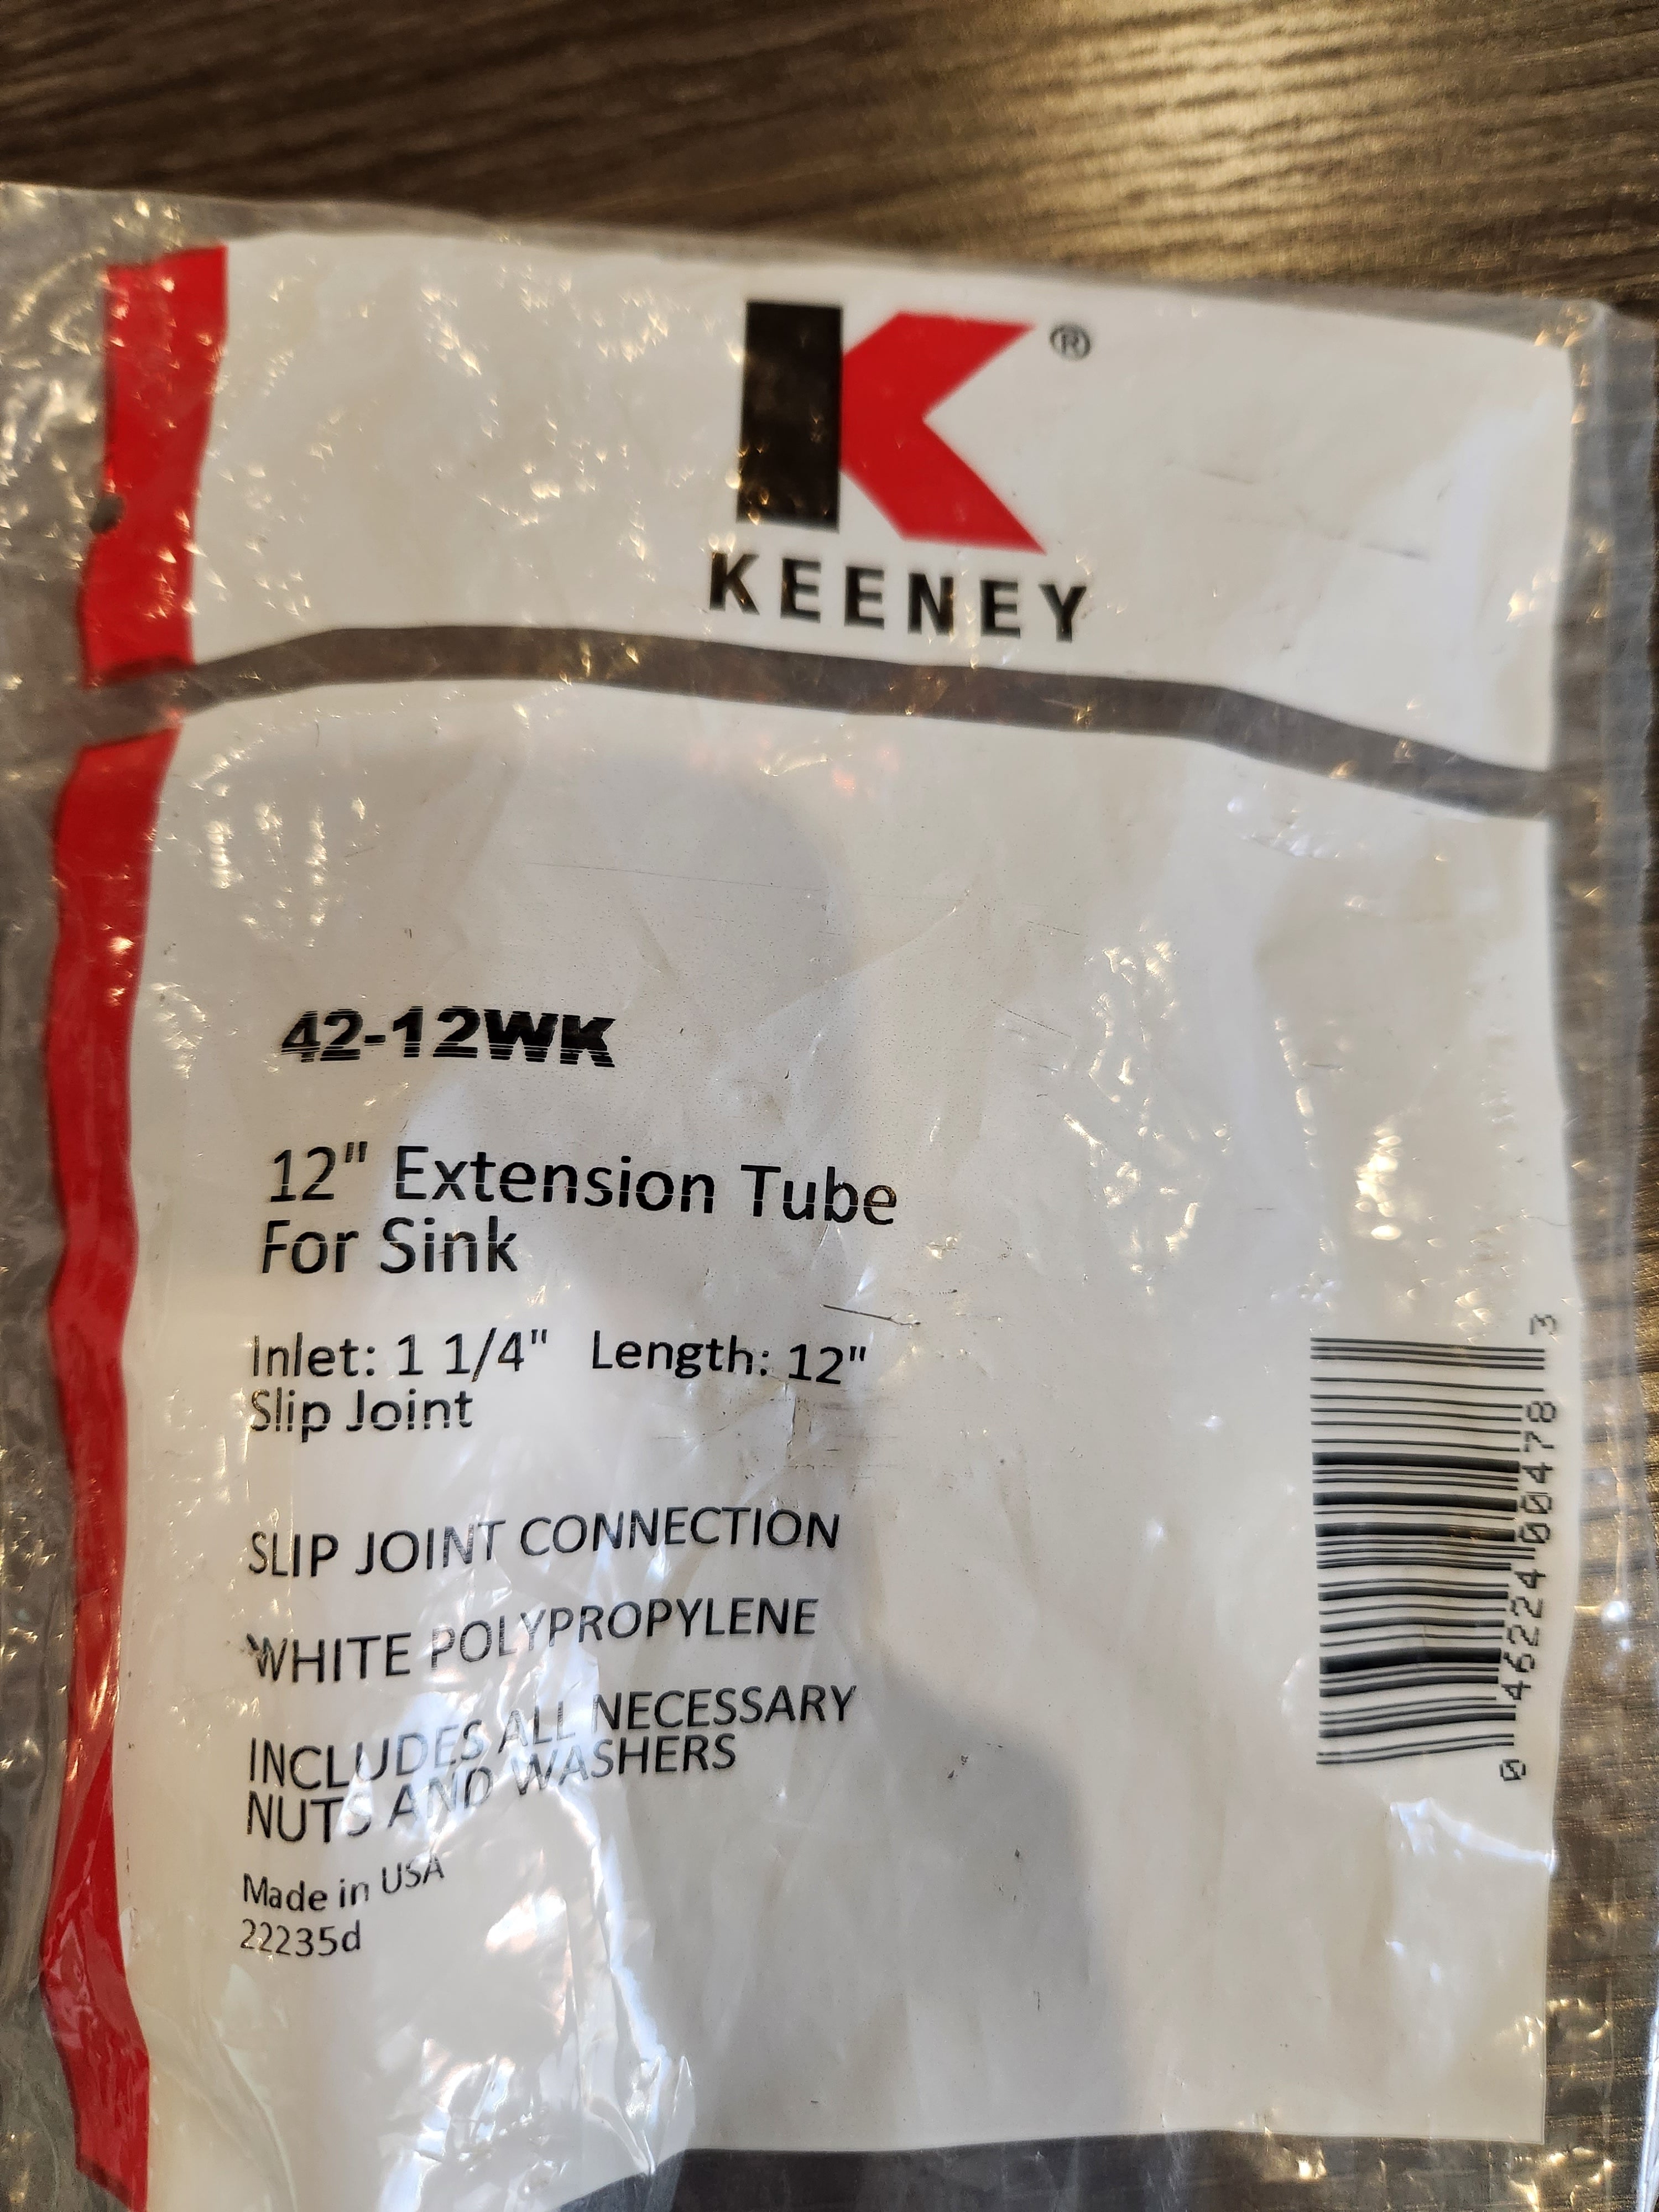 Keeney 42-12wk -- 12" Extension Tube for Sink